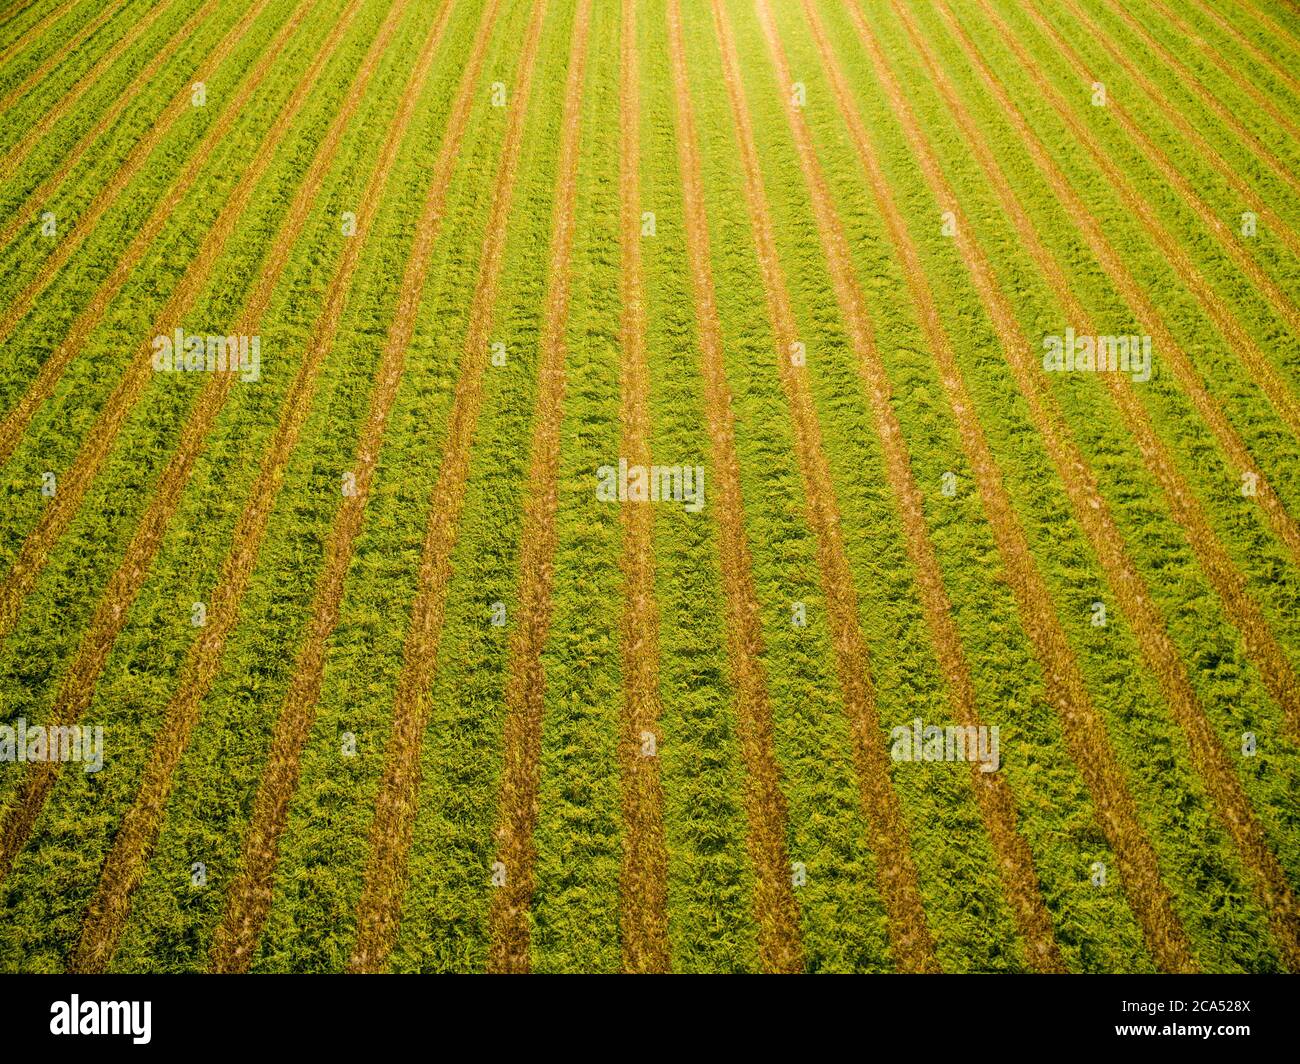 View of Alfalfa field during harvest, Marion Co., Illinois, USA Stock Photo